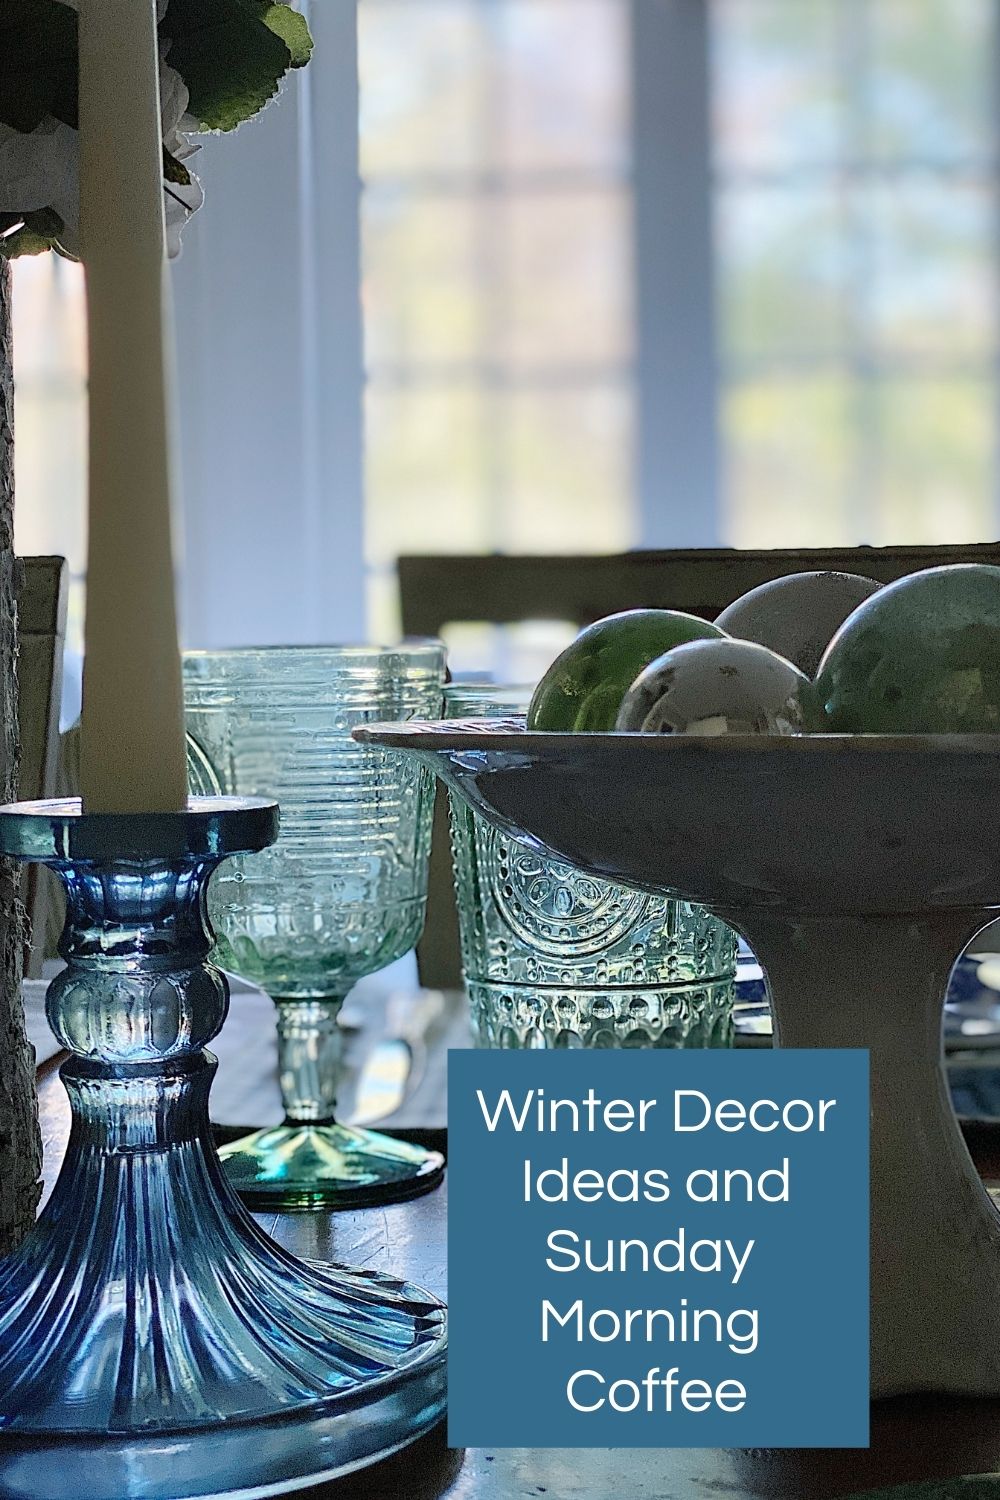 I was so sure that I would miss the Christmas decor when it all came down. But guess what? I love my new winter decor ideas just as much!